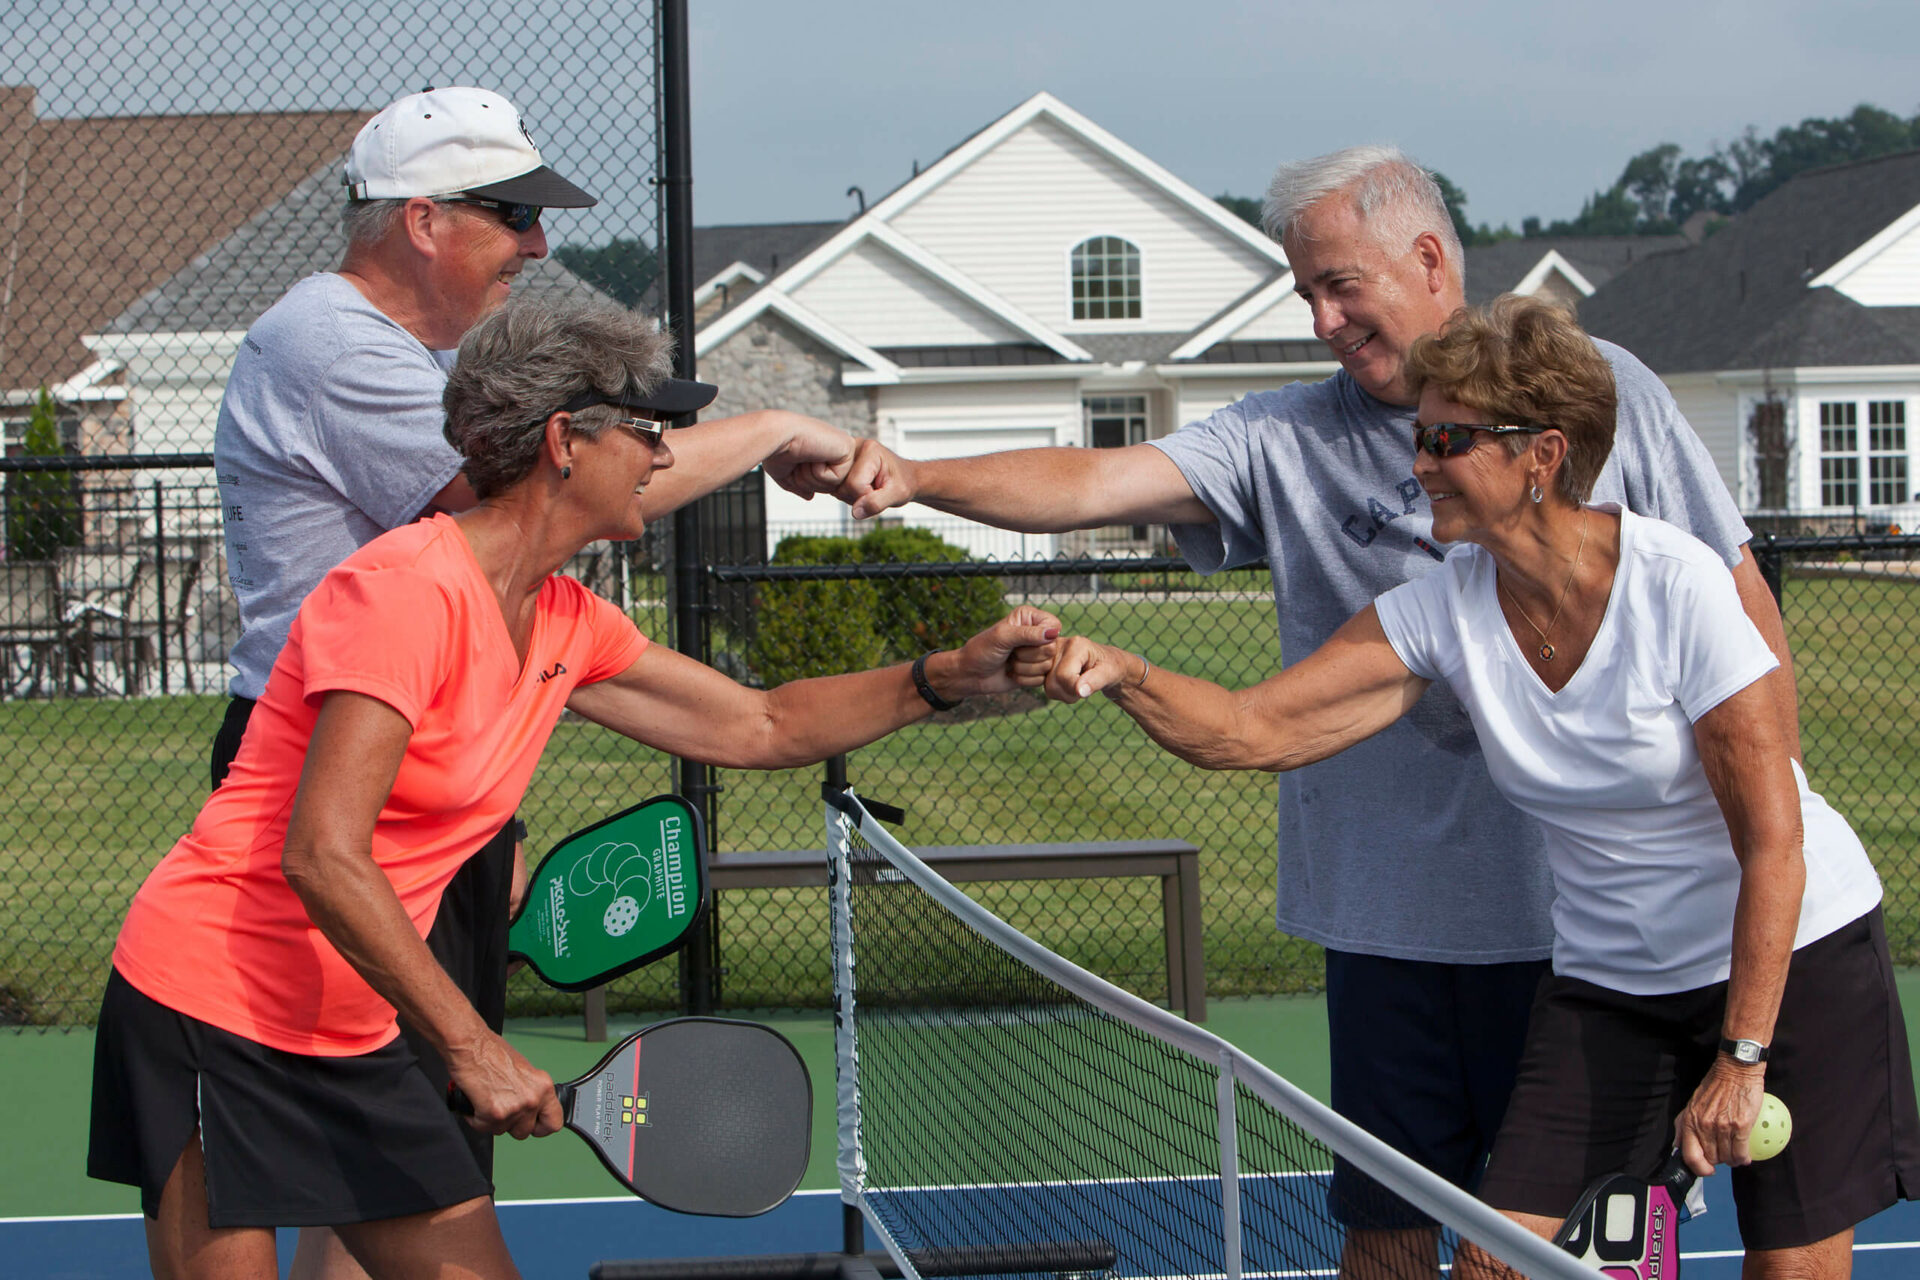 People fist-bumping over a pickle ball net in a Traditions of America community court